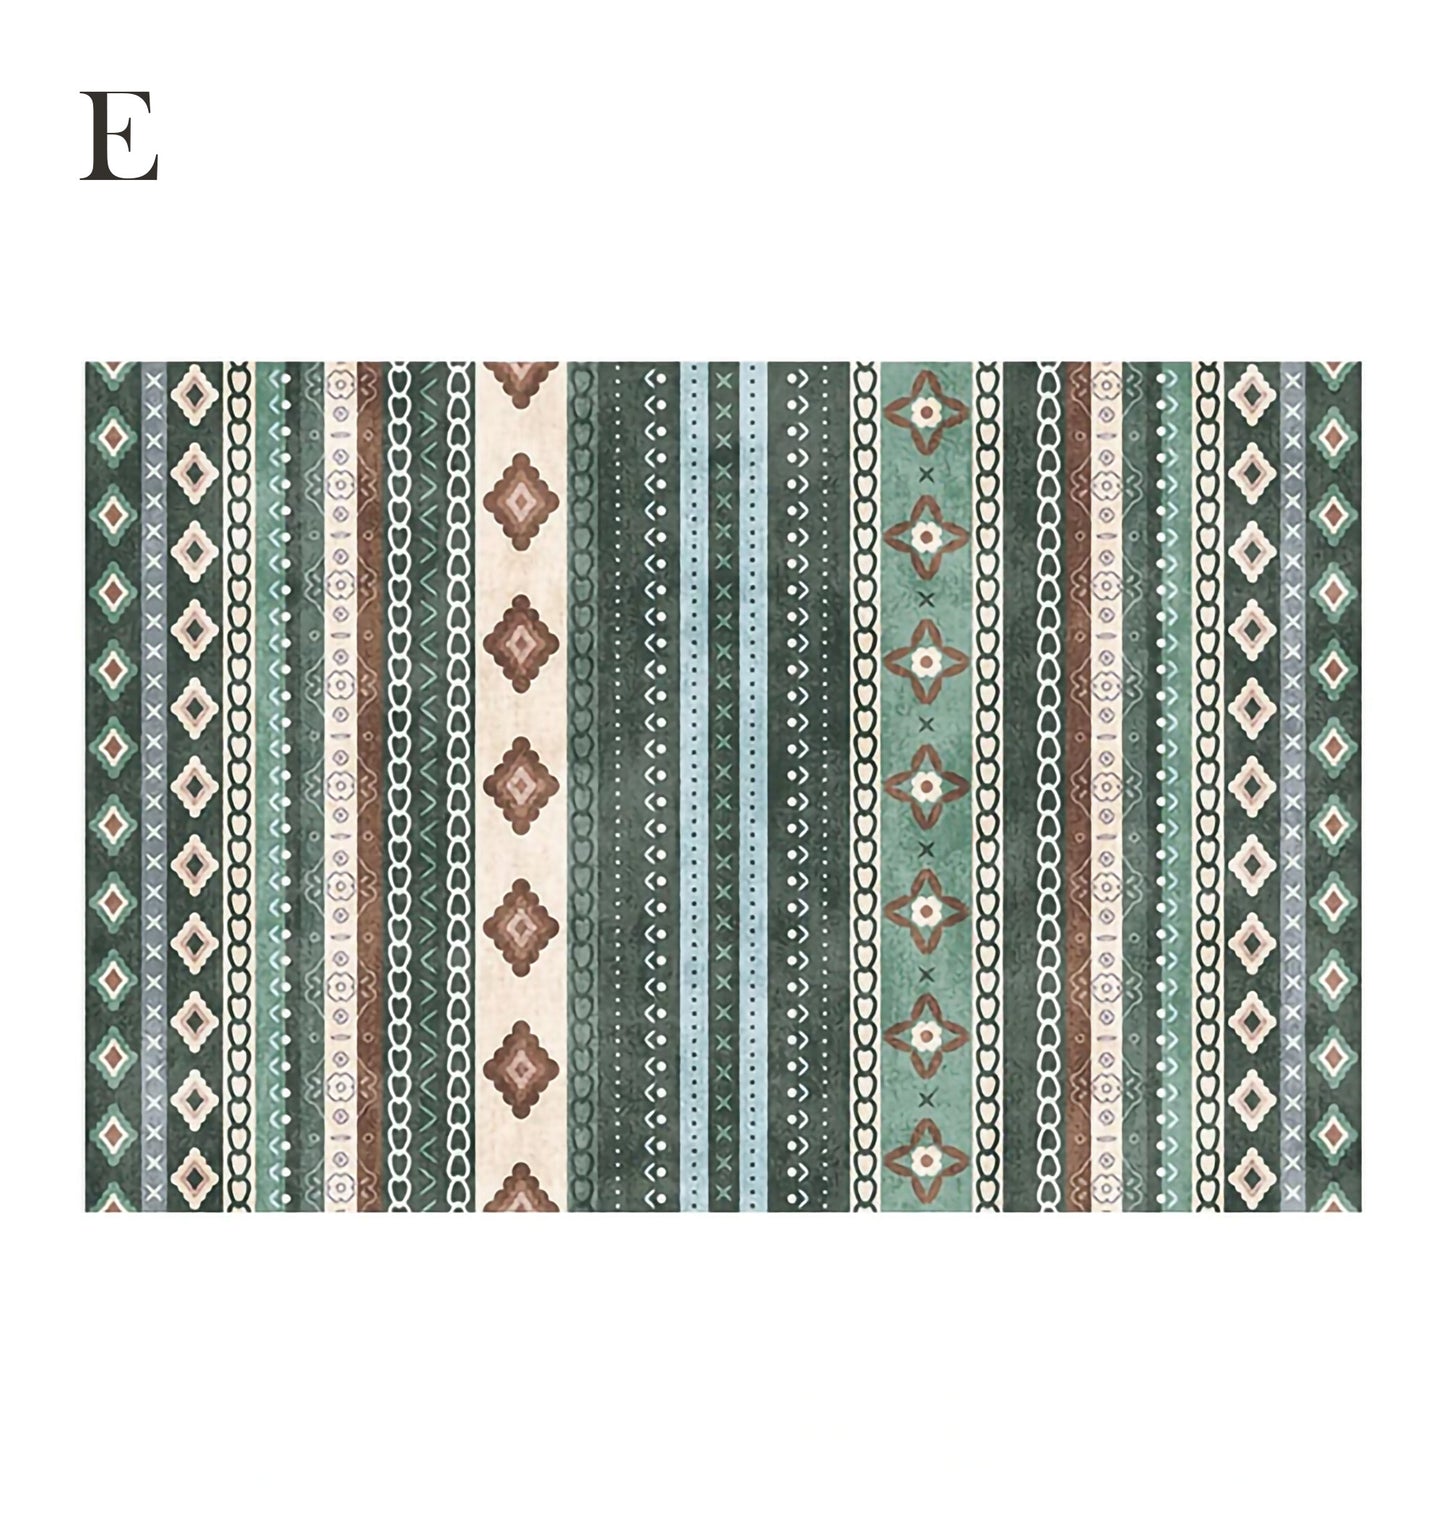 Abstract Bohemian Rugs for Bedroom Decor │ Retro Moroccan Style Living Room Carpet │ Anti-Slip Lounge Floor Mat Besontique